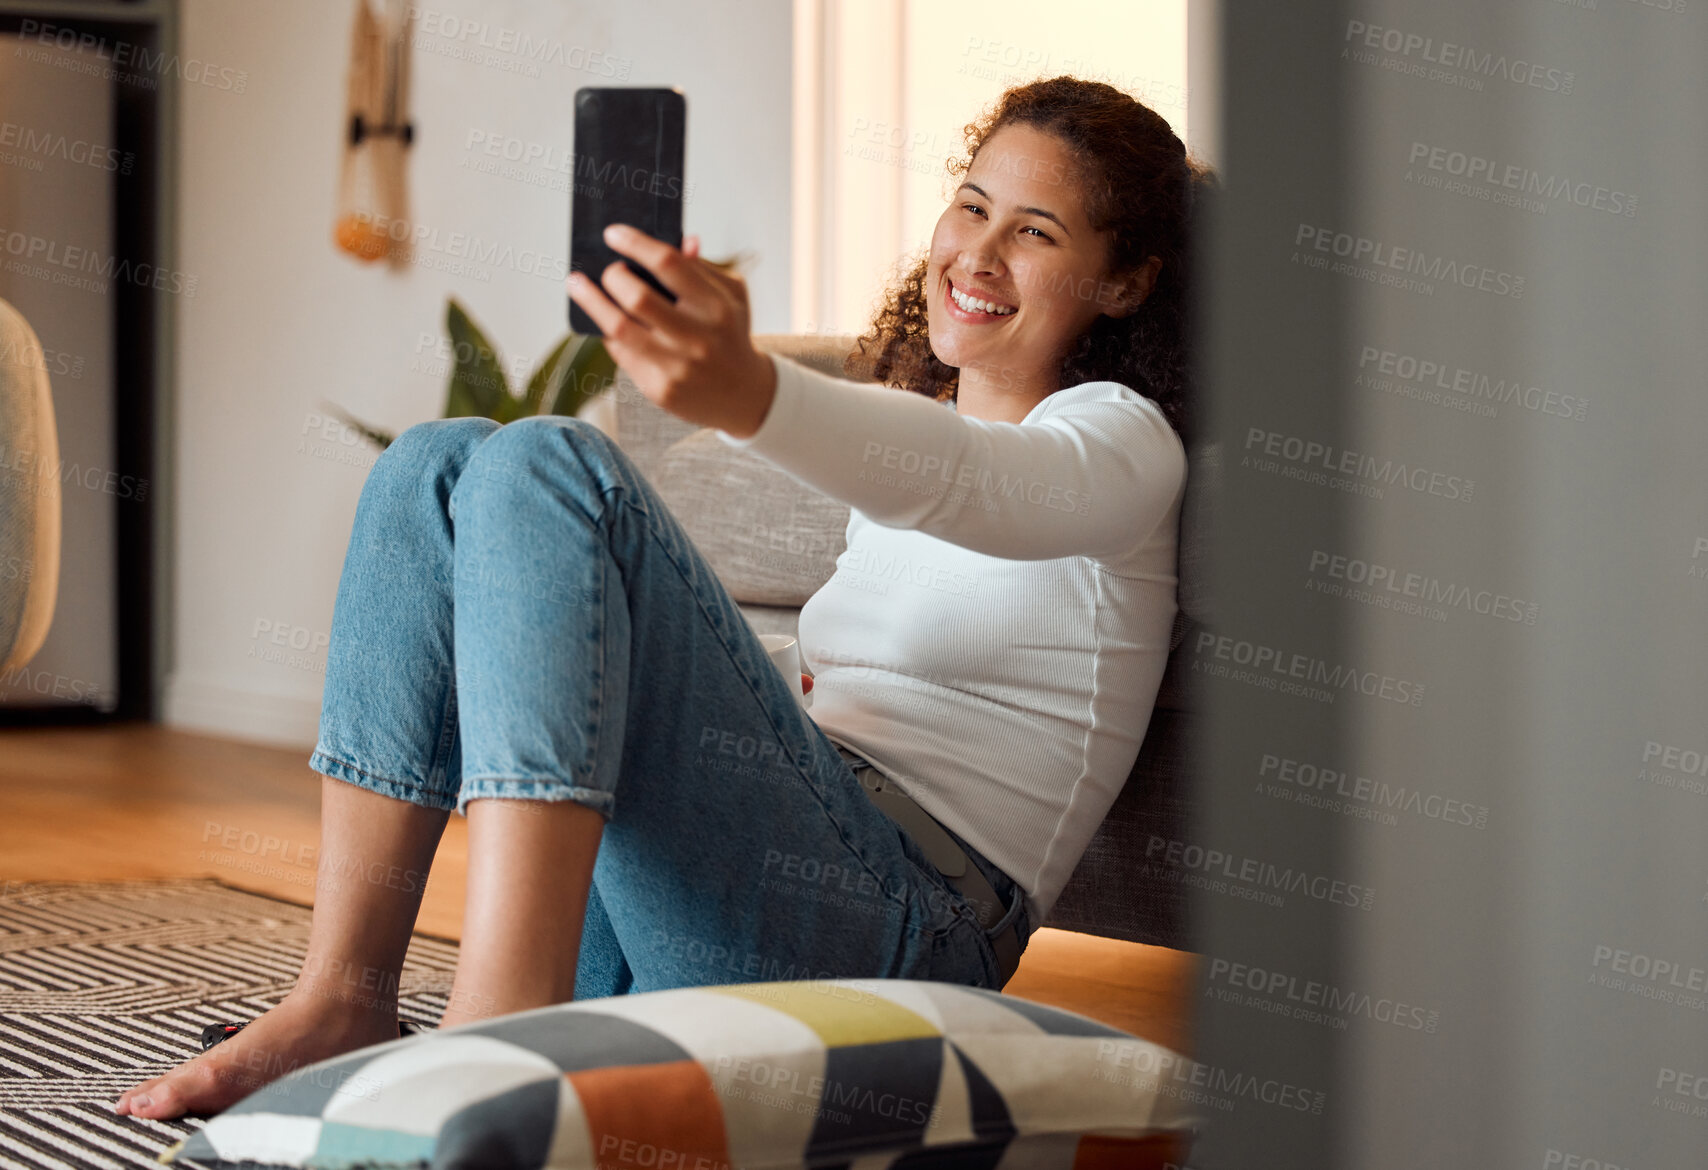 Buy stock photo Young woman taking selfies with a cellphone. Girl sitting on the floor taking photos. Smiling young woman taking a selfie on her smartphone. Woman using her mobile phone at home.